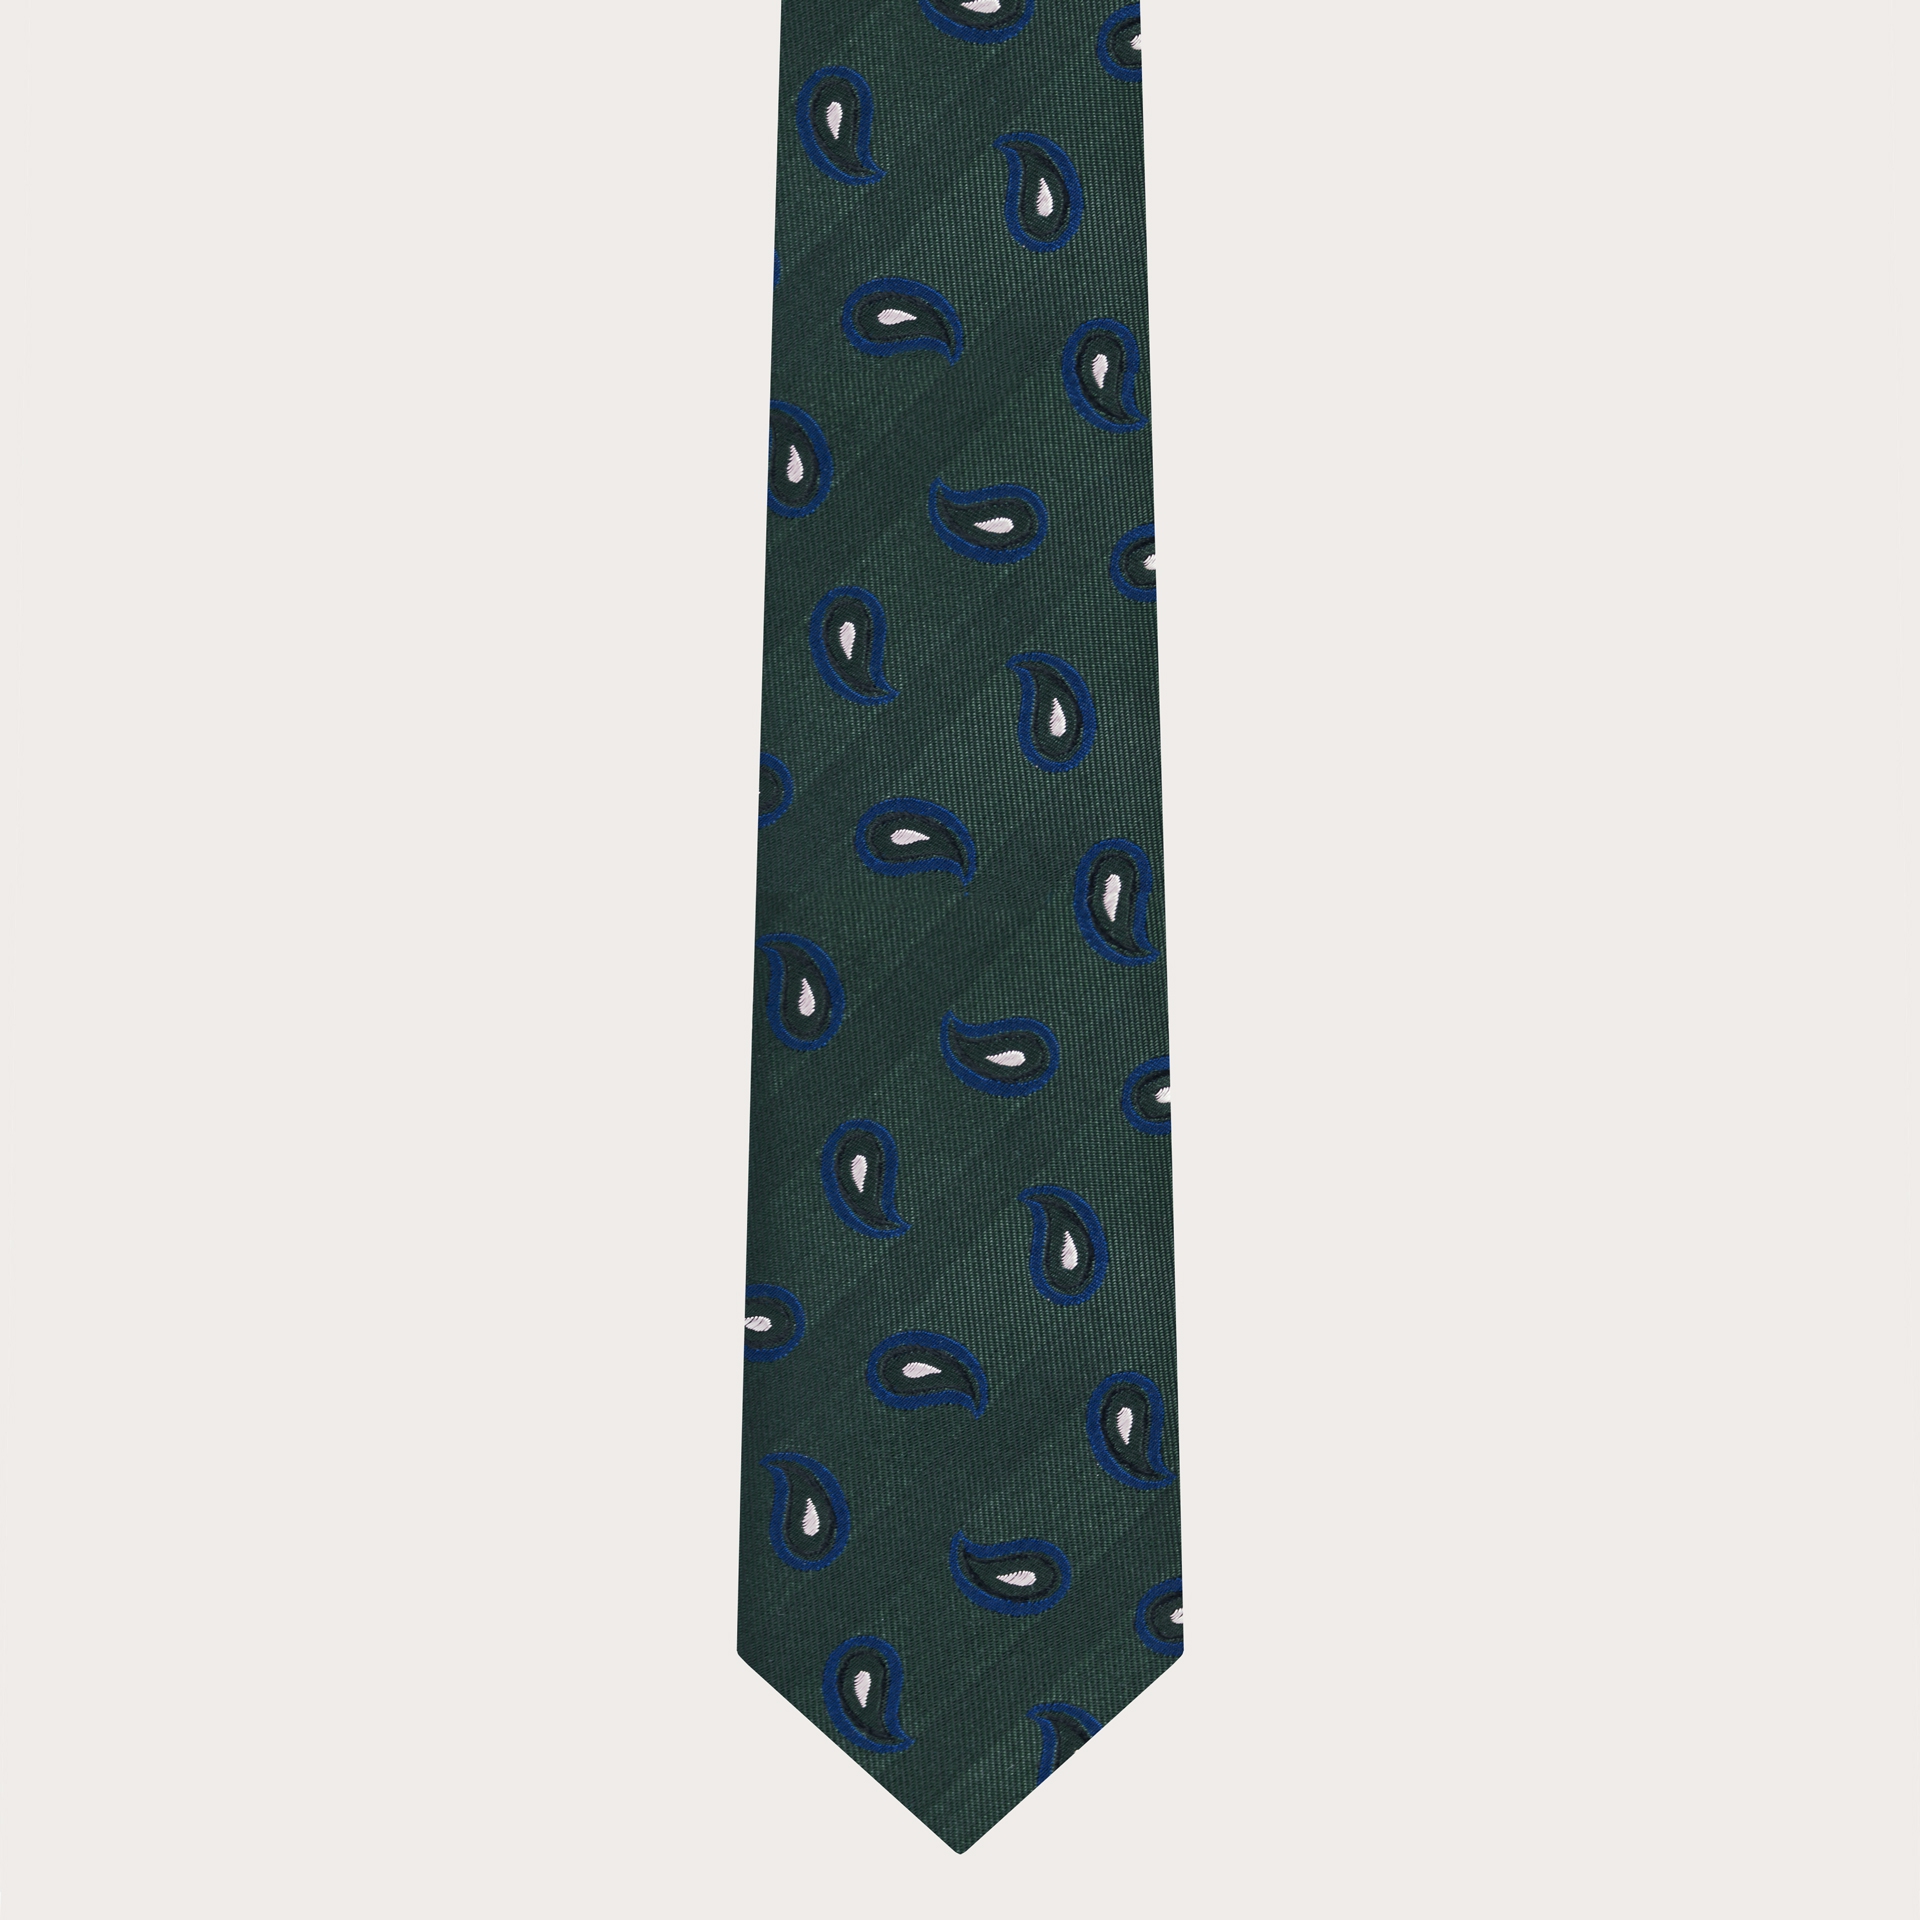 BRUCLE Green men's tie with blue paisley pattern